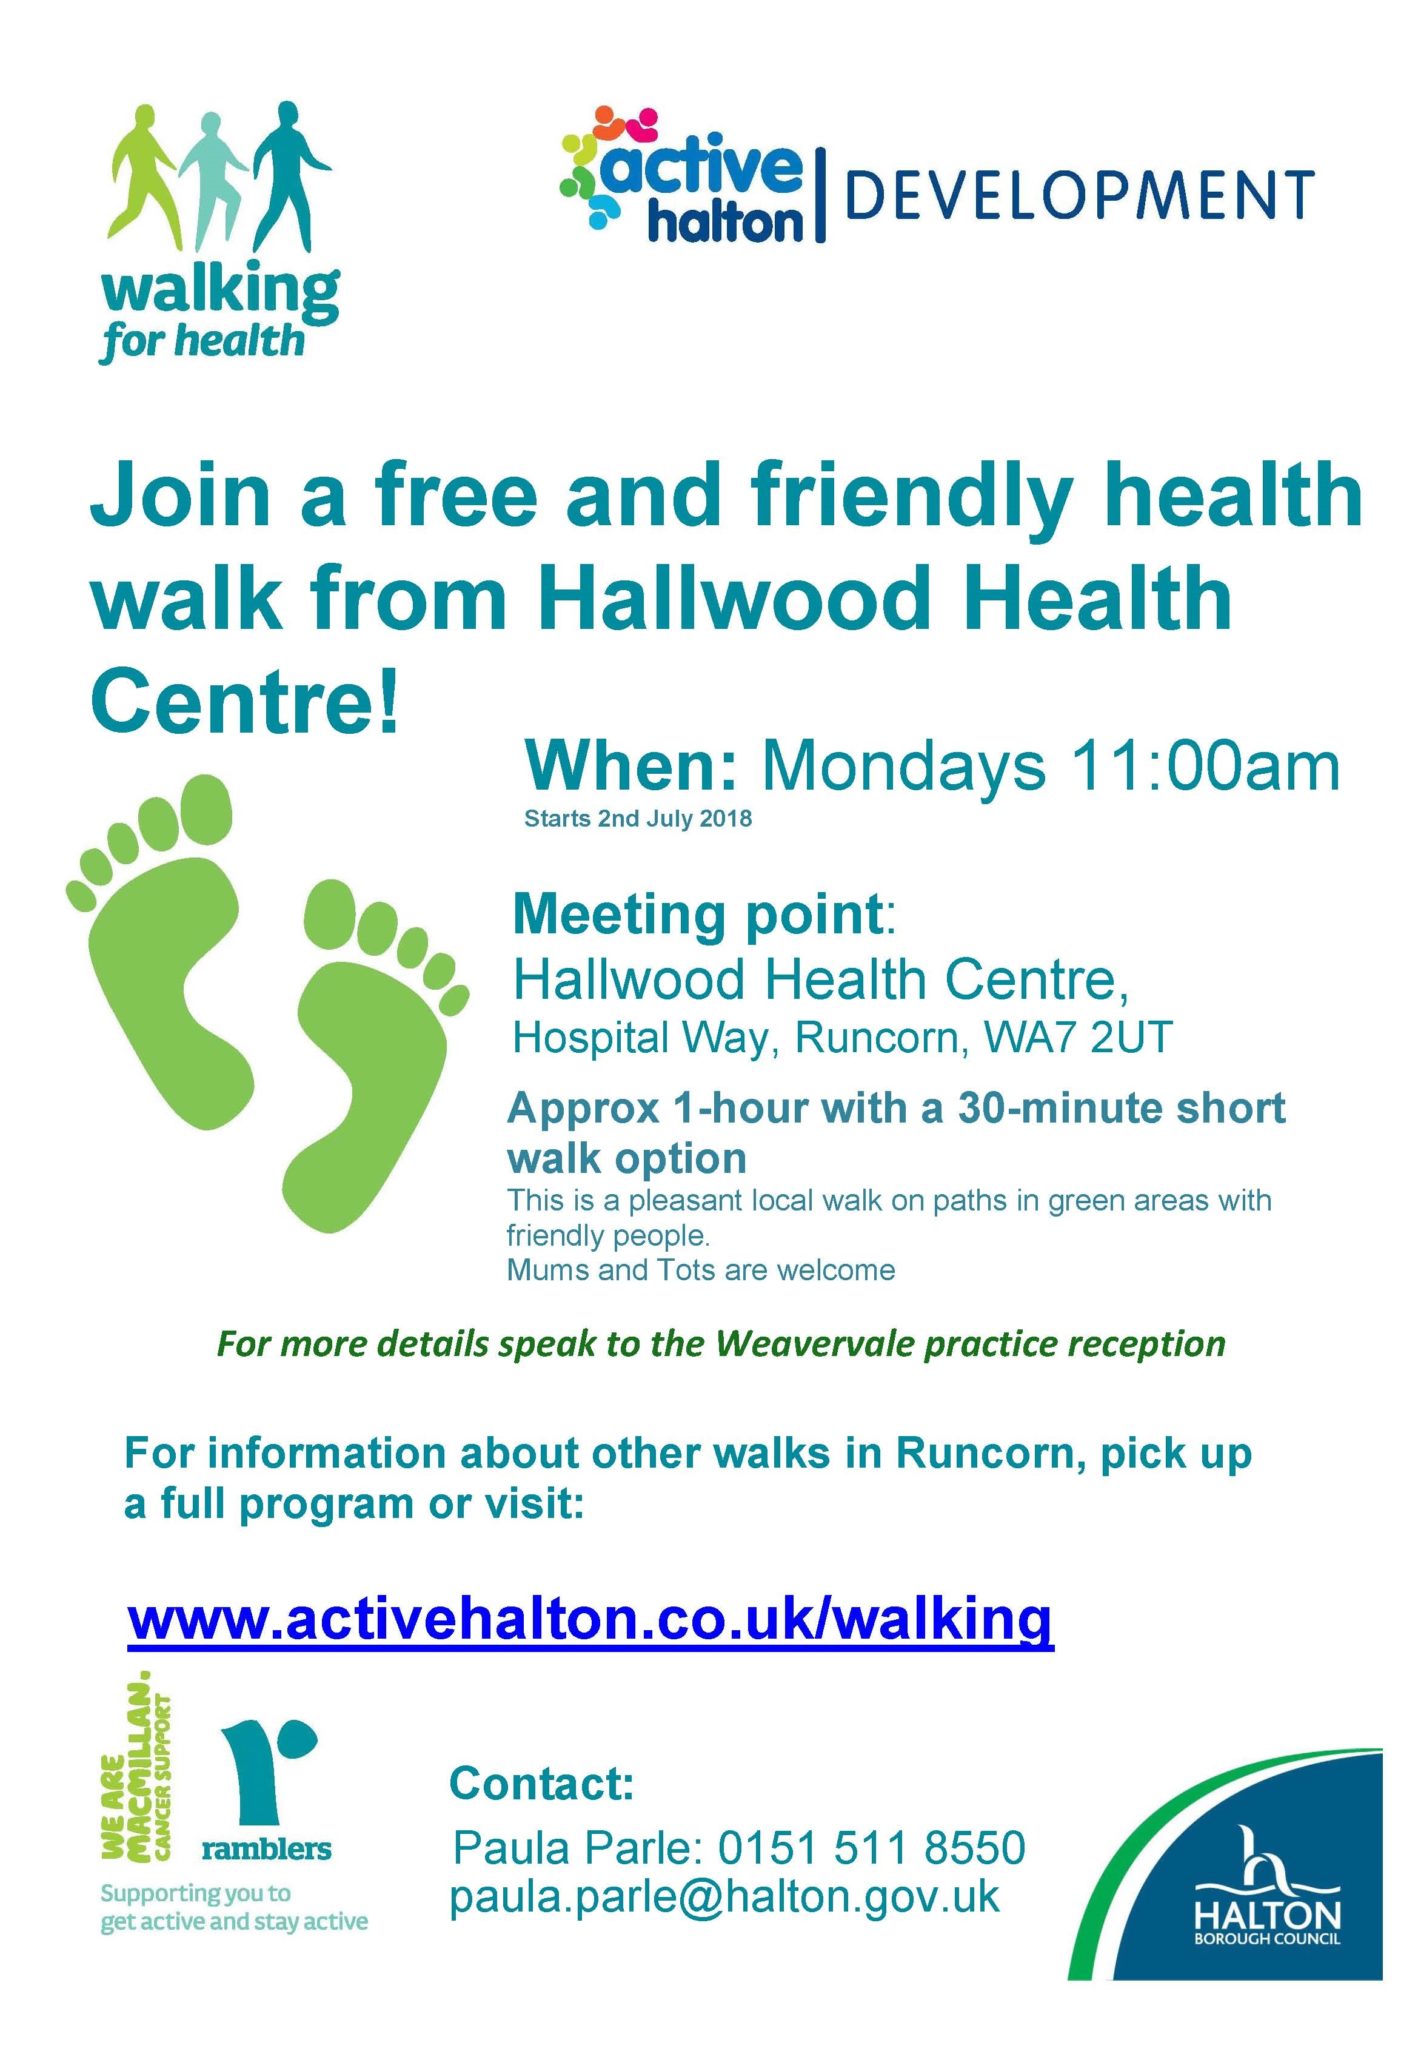 NEW health walks launched today 🗓